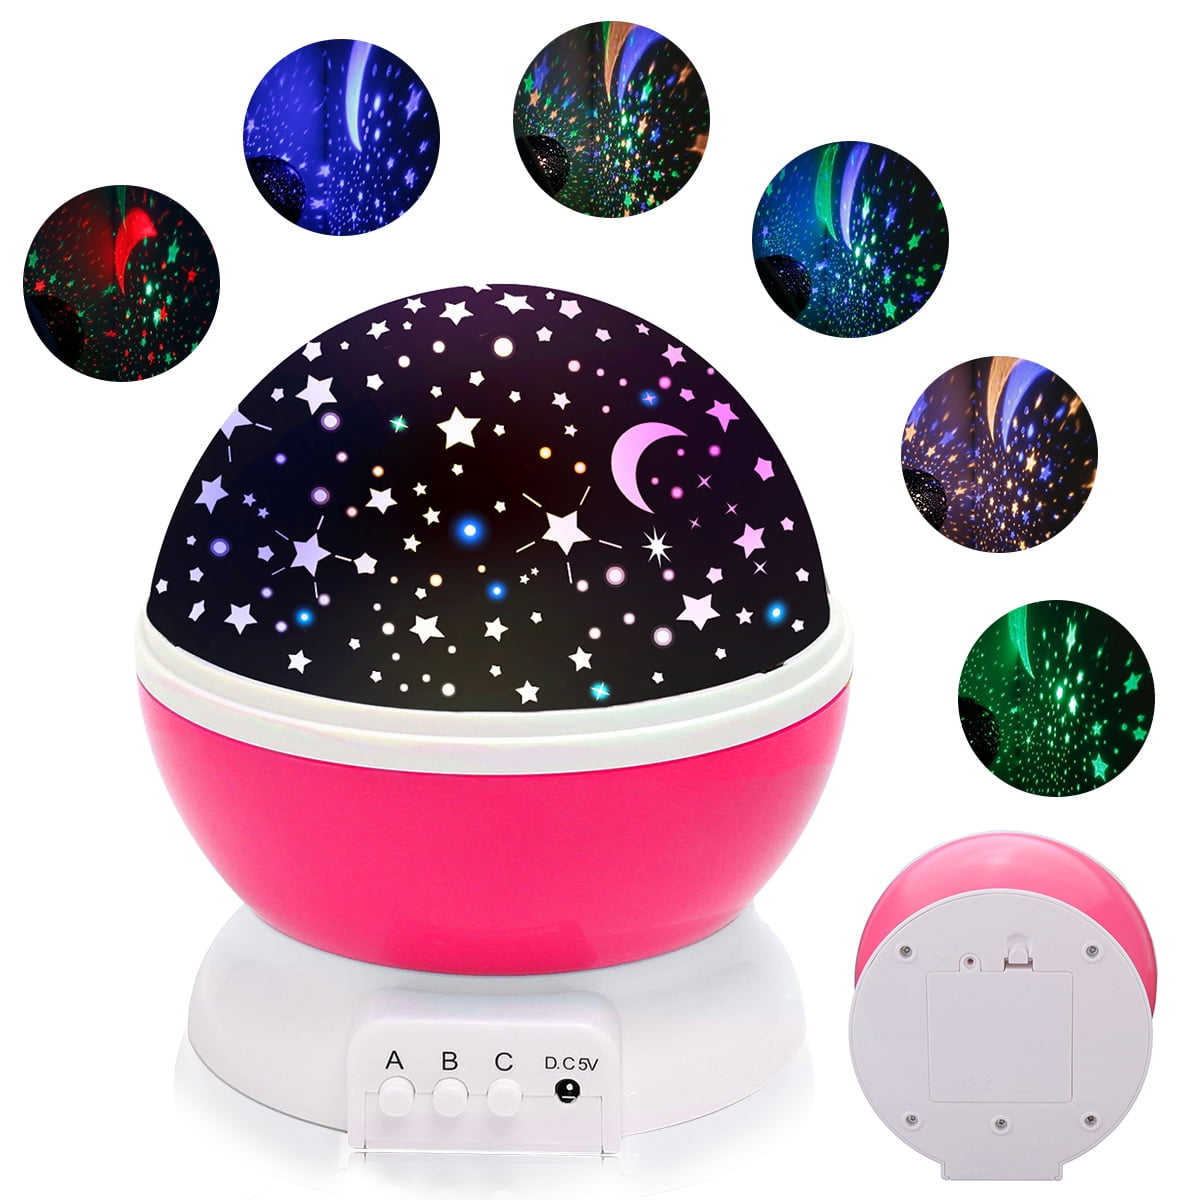 Details about   Sky Light Projector USB Star Projector Night Light Romantic Car Galaxy Projector 